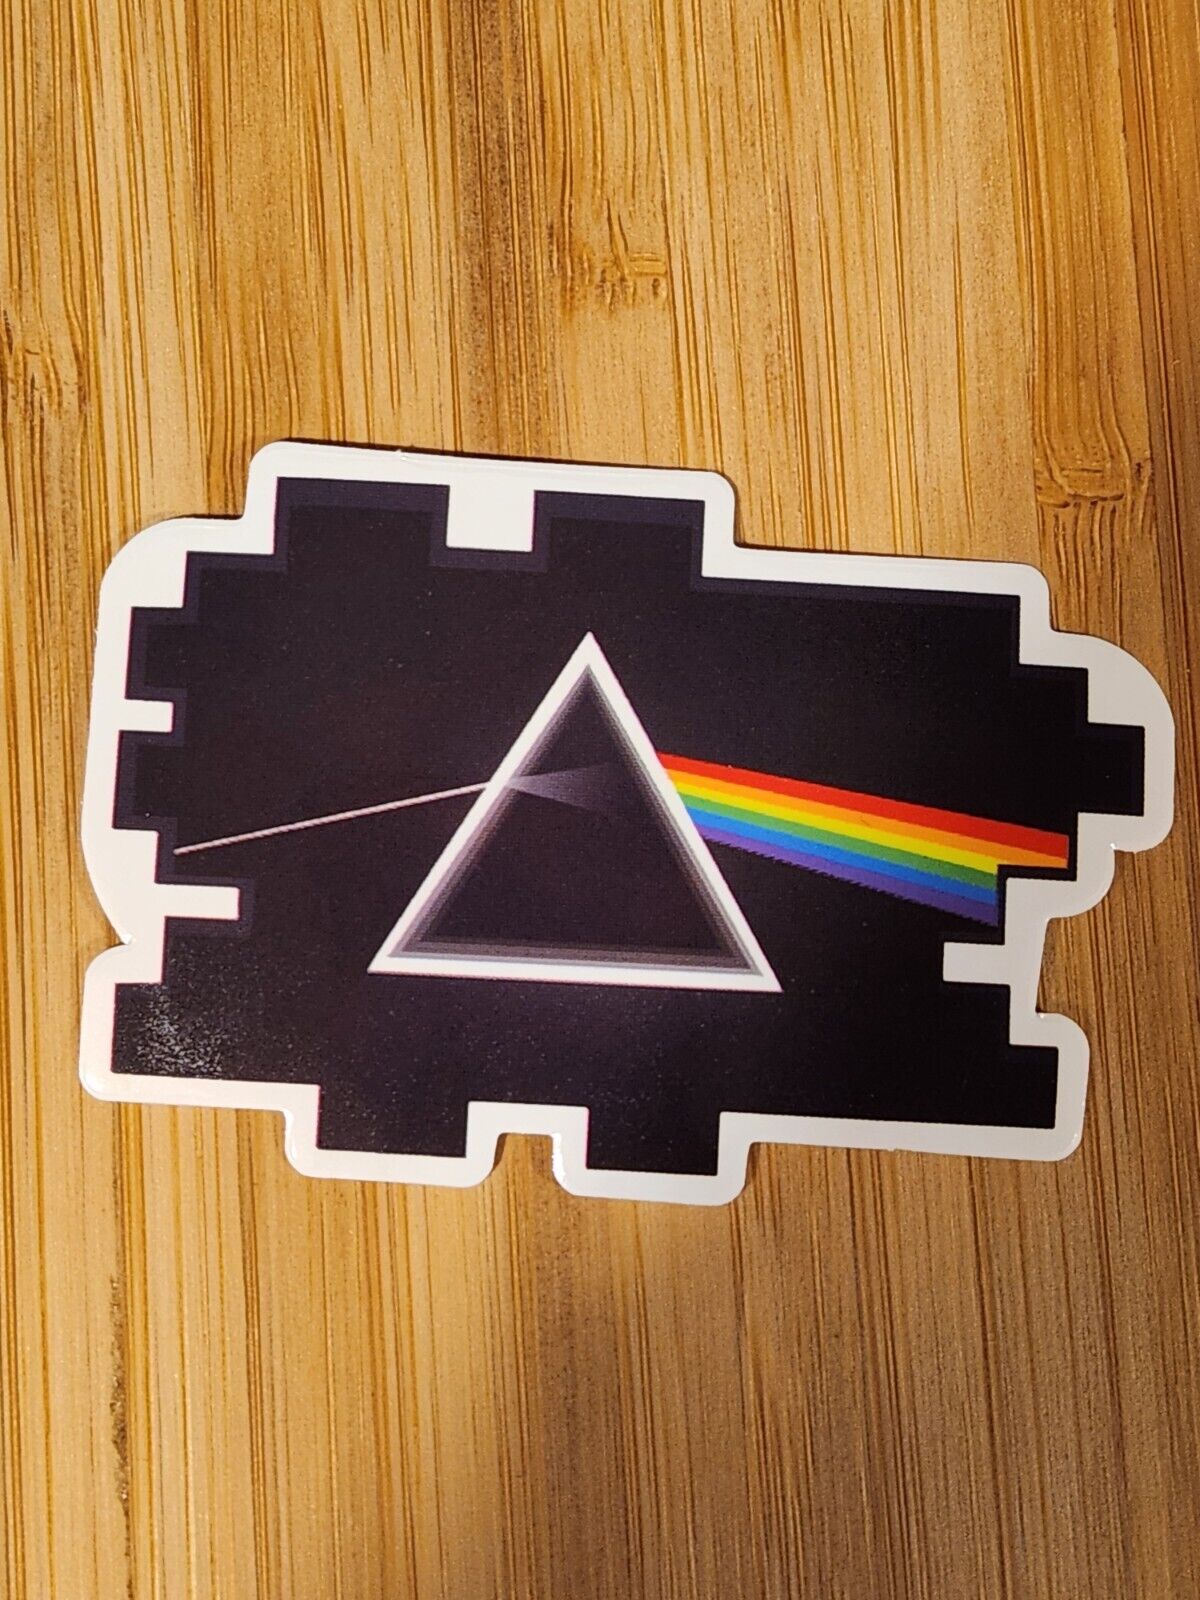 PINK FLOYD STICKER Classic Rock Sticker Pink Floyd Decal 60s 70s Rock And Roll